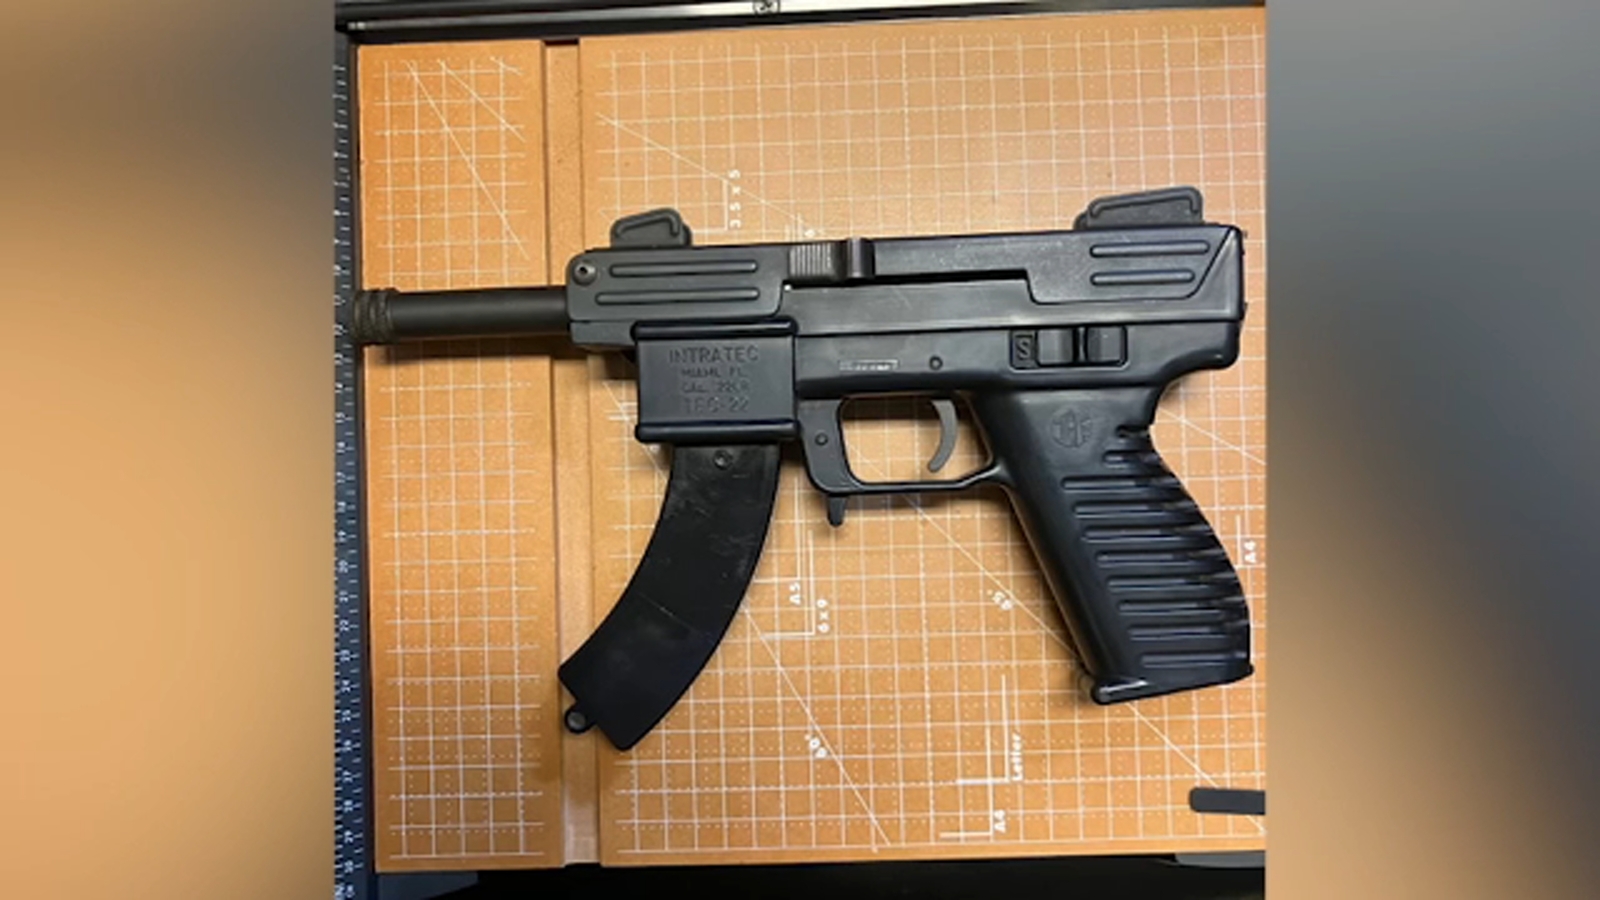 teenager found with loaded semi-automatic weapon by police in Brooklyn subway station